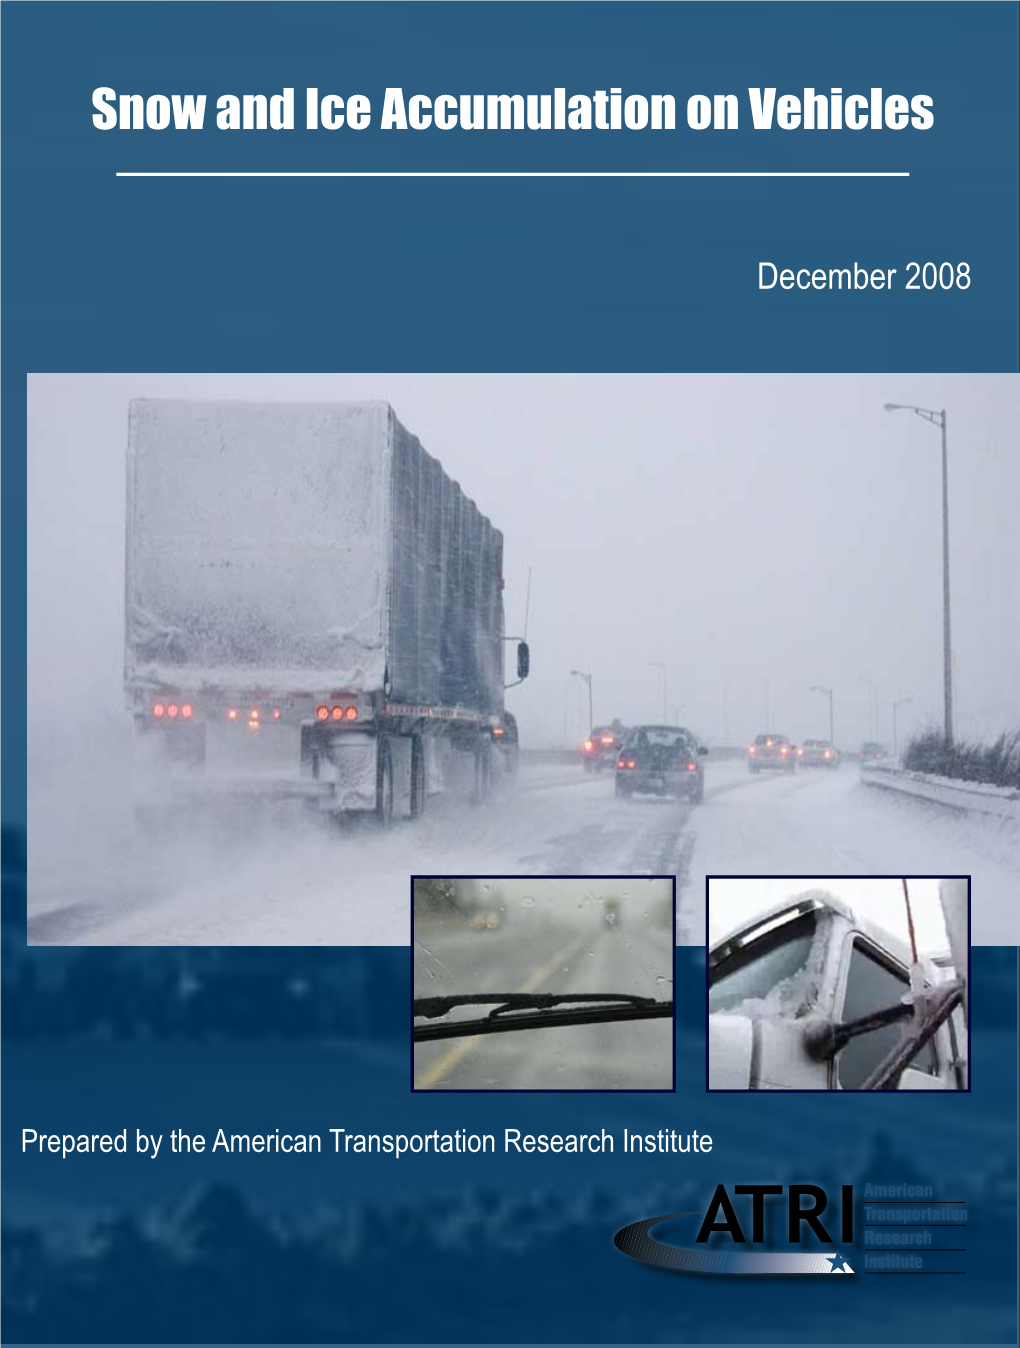 Snow and Ice Accumulation on Vehicles